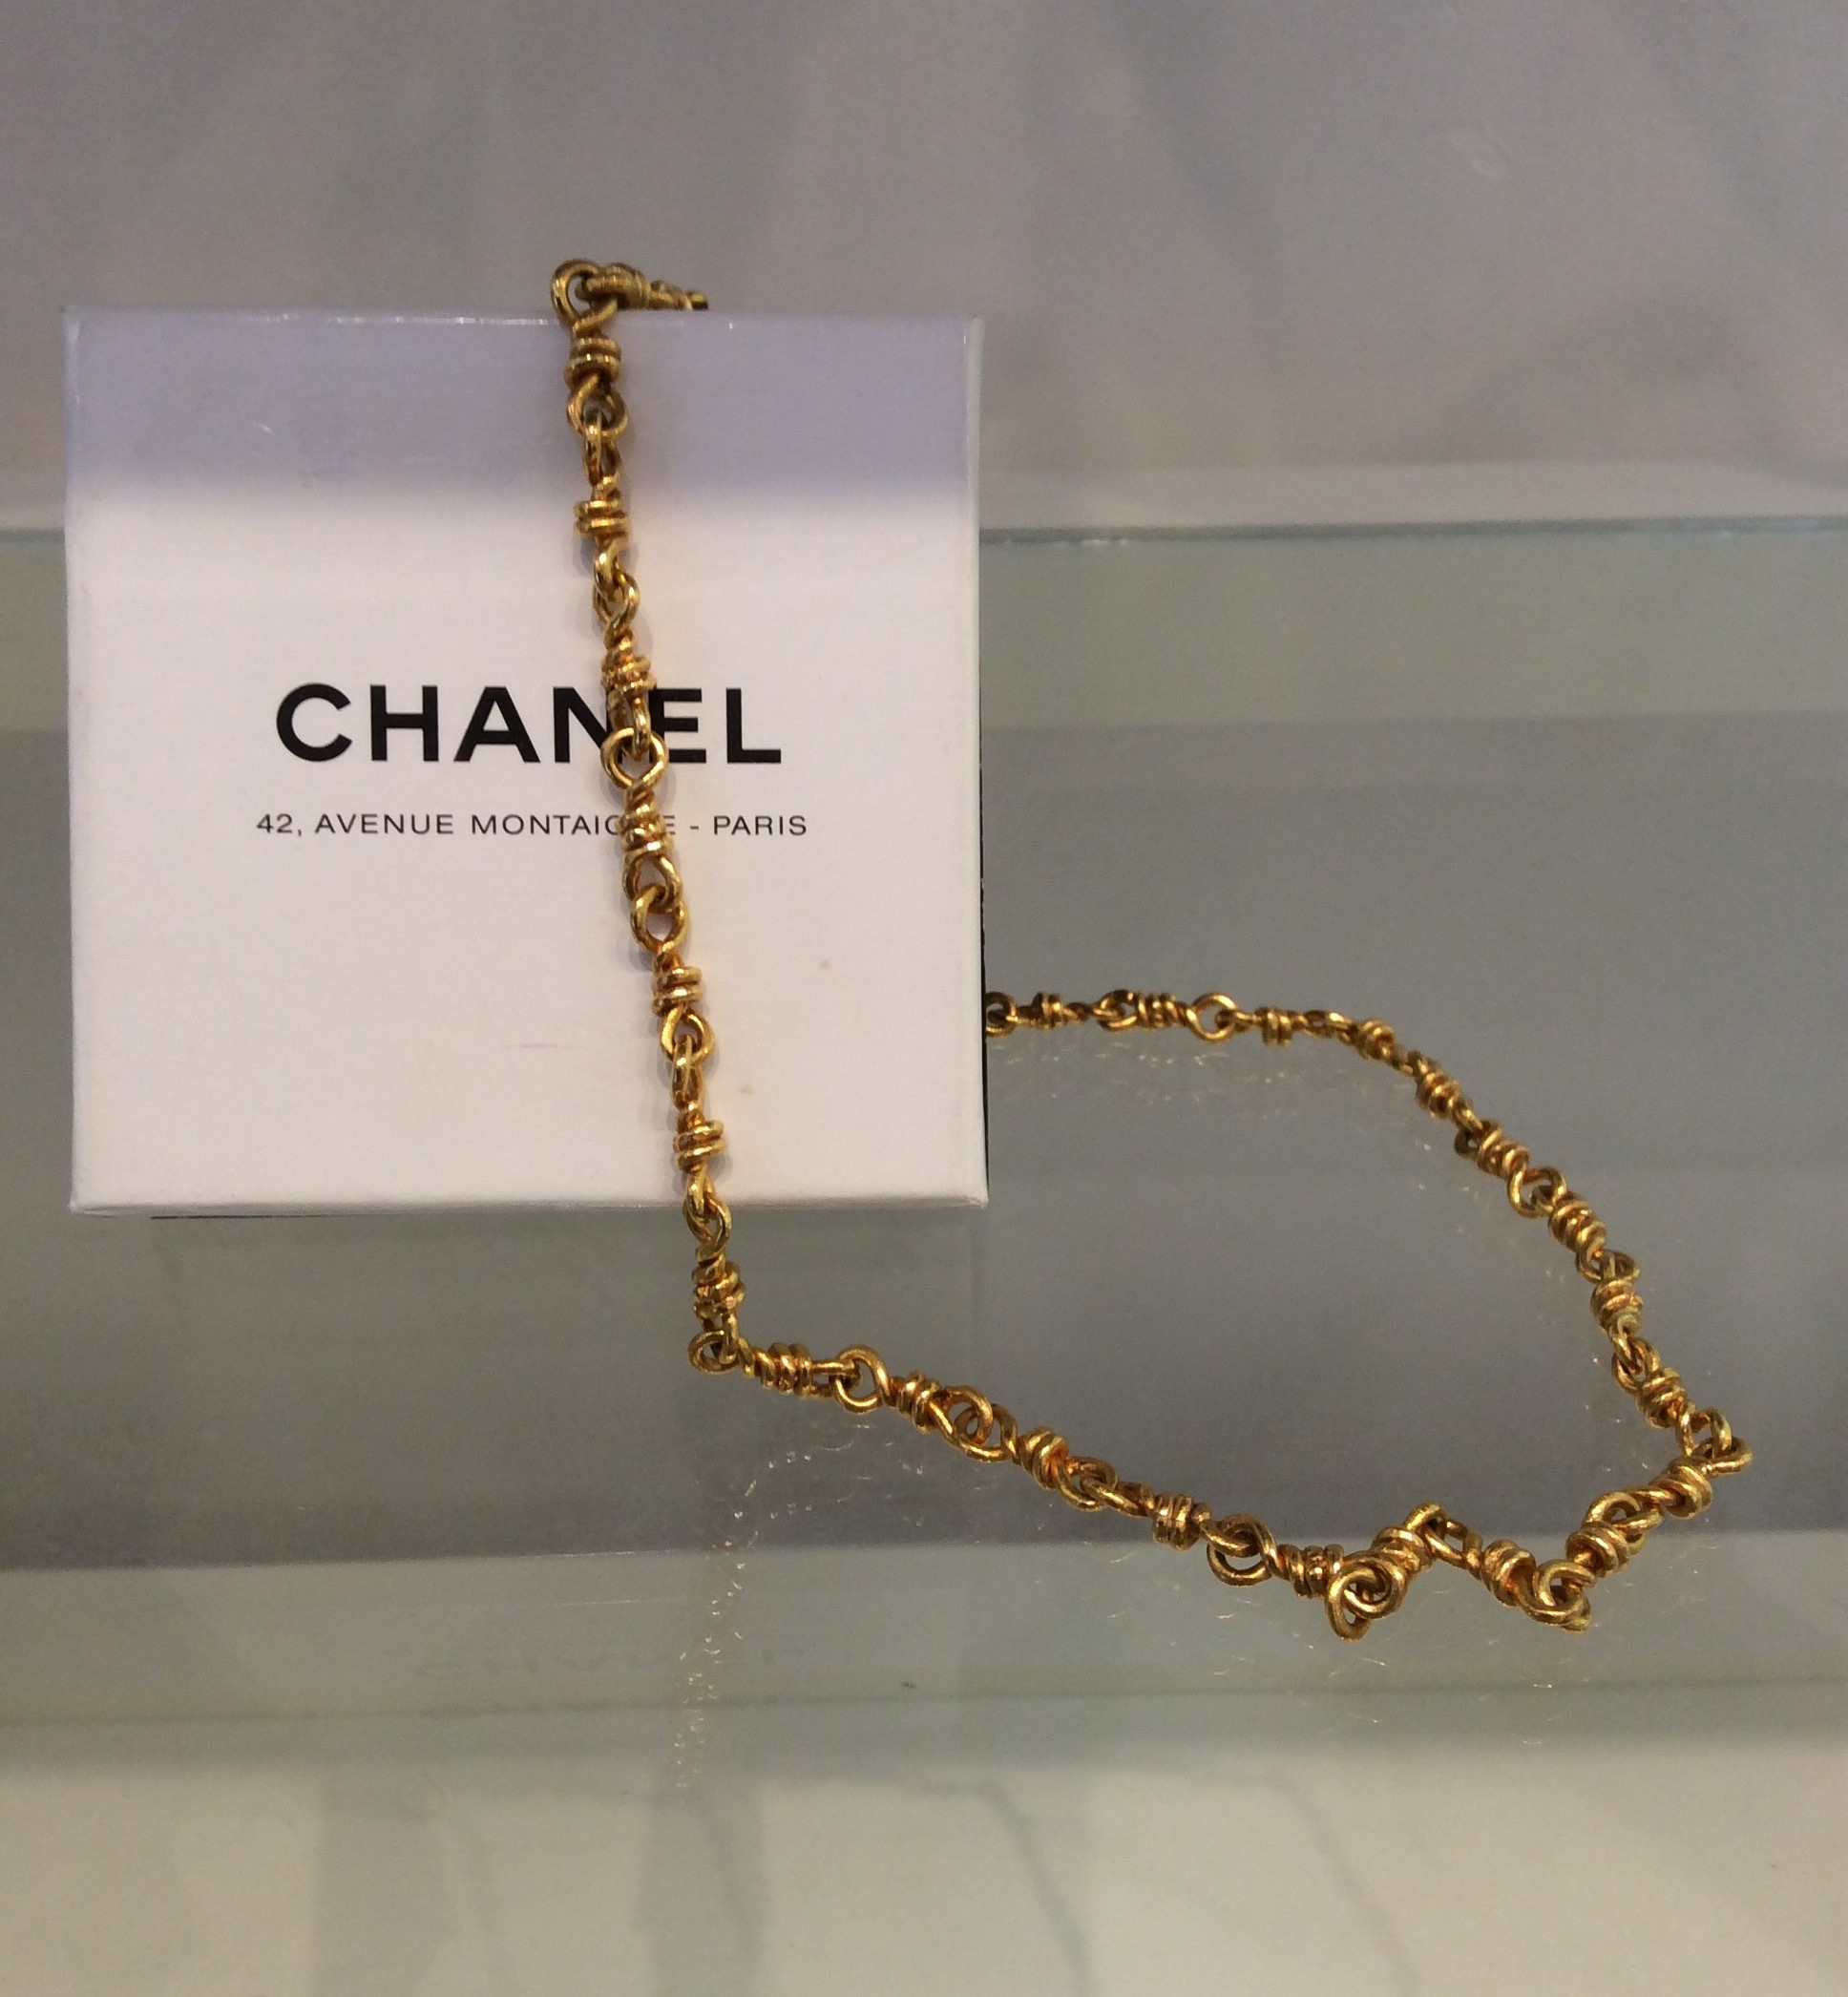 Chanel – Finley House Couture